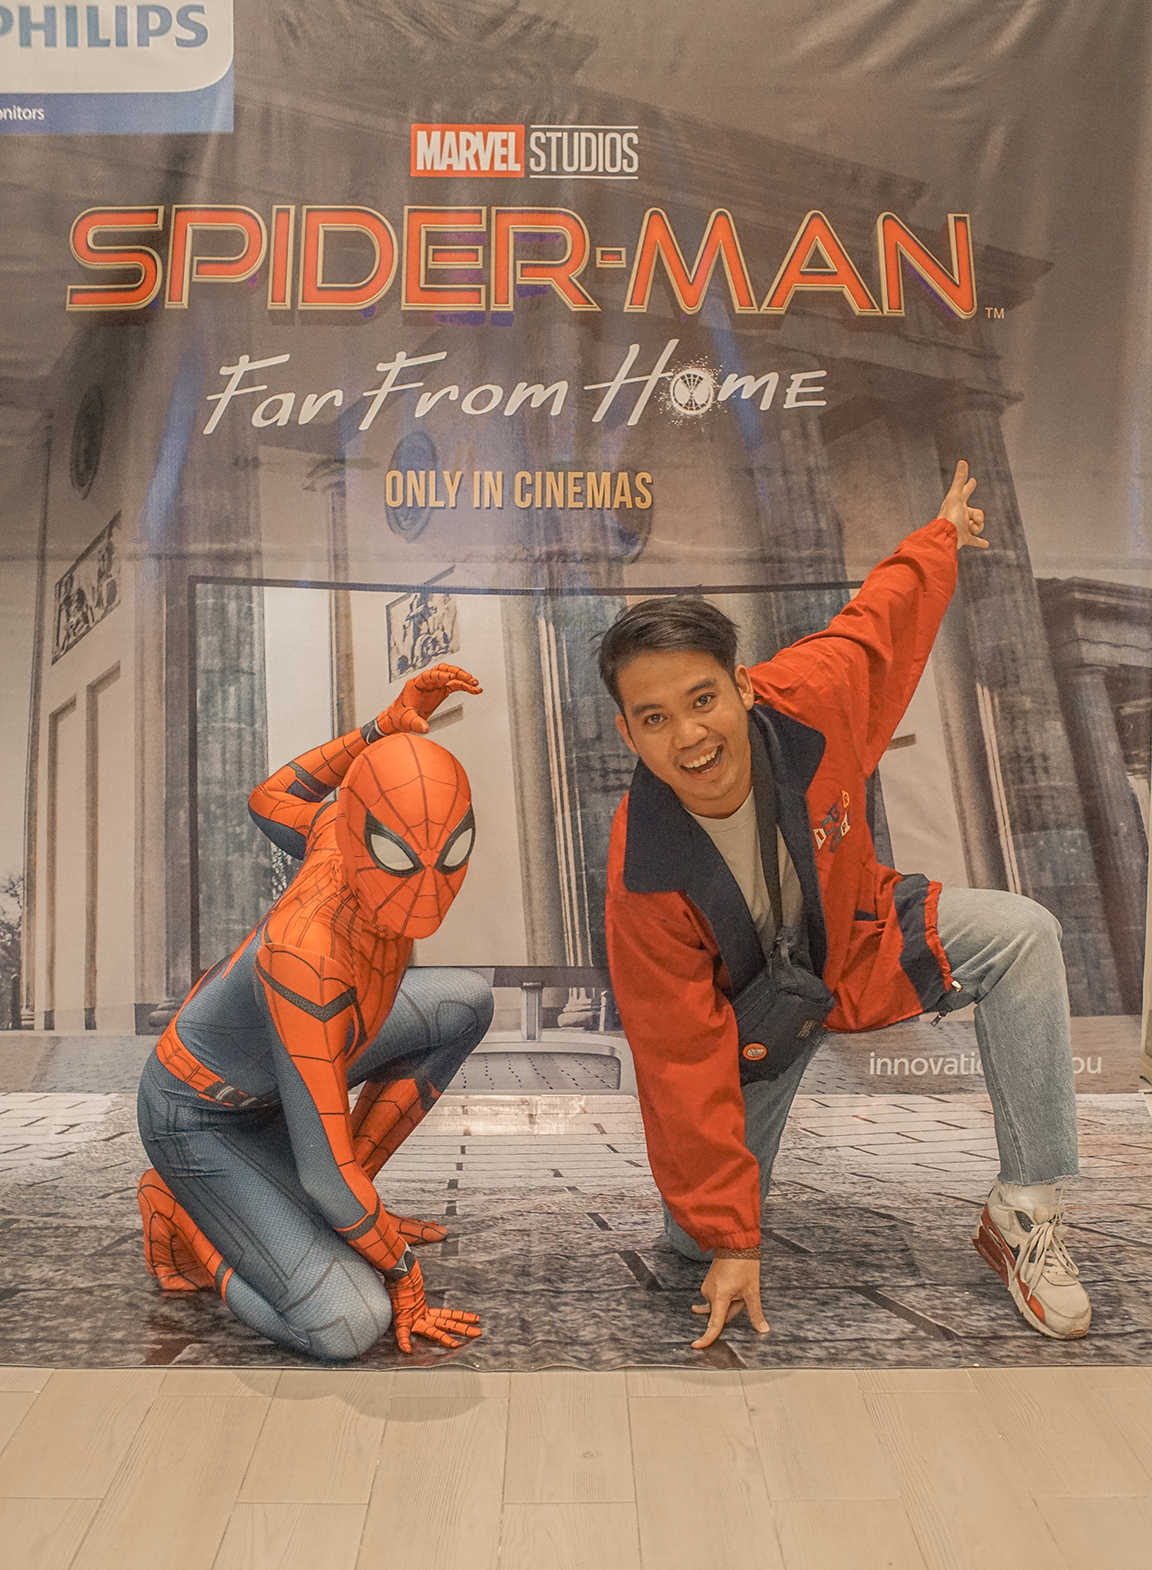 Philips Monitors team up with Sony Pictures for Spider-Man™: Far From Home